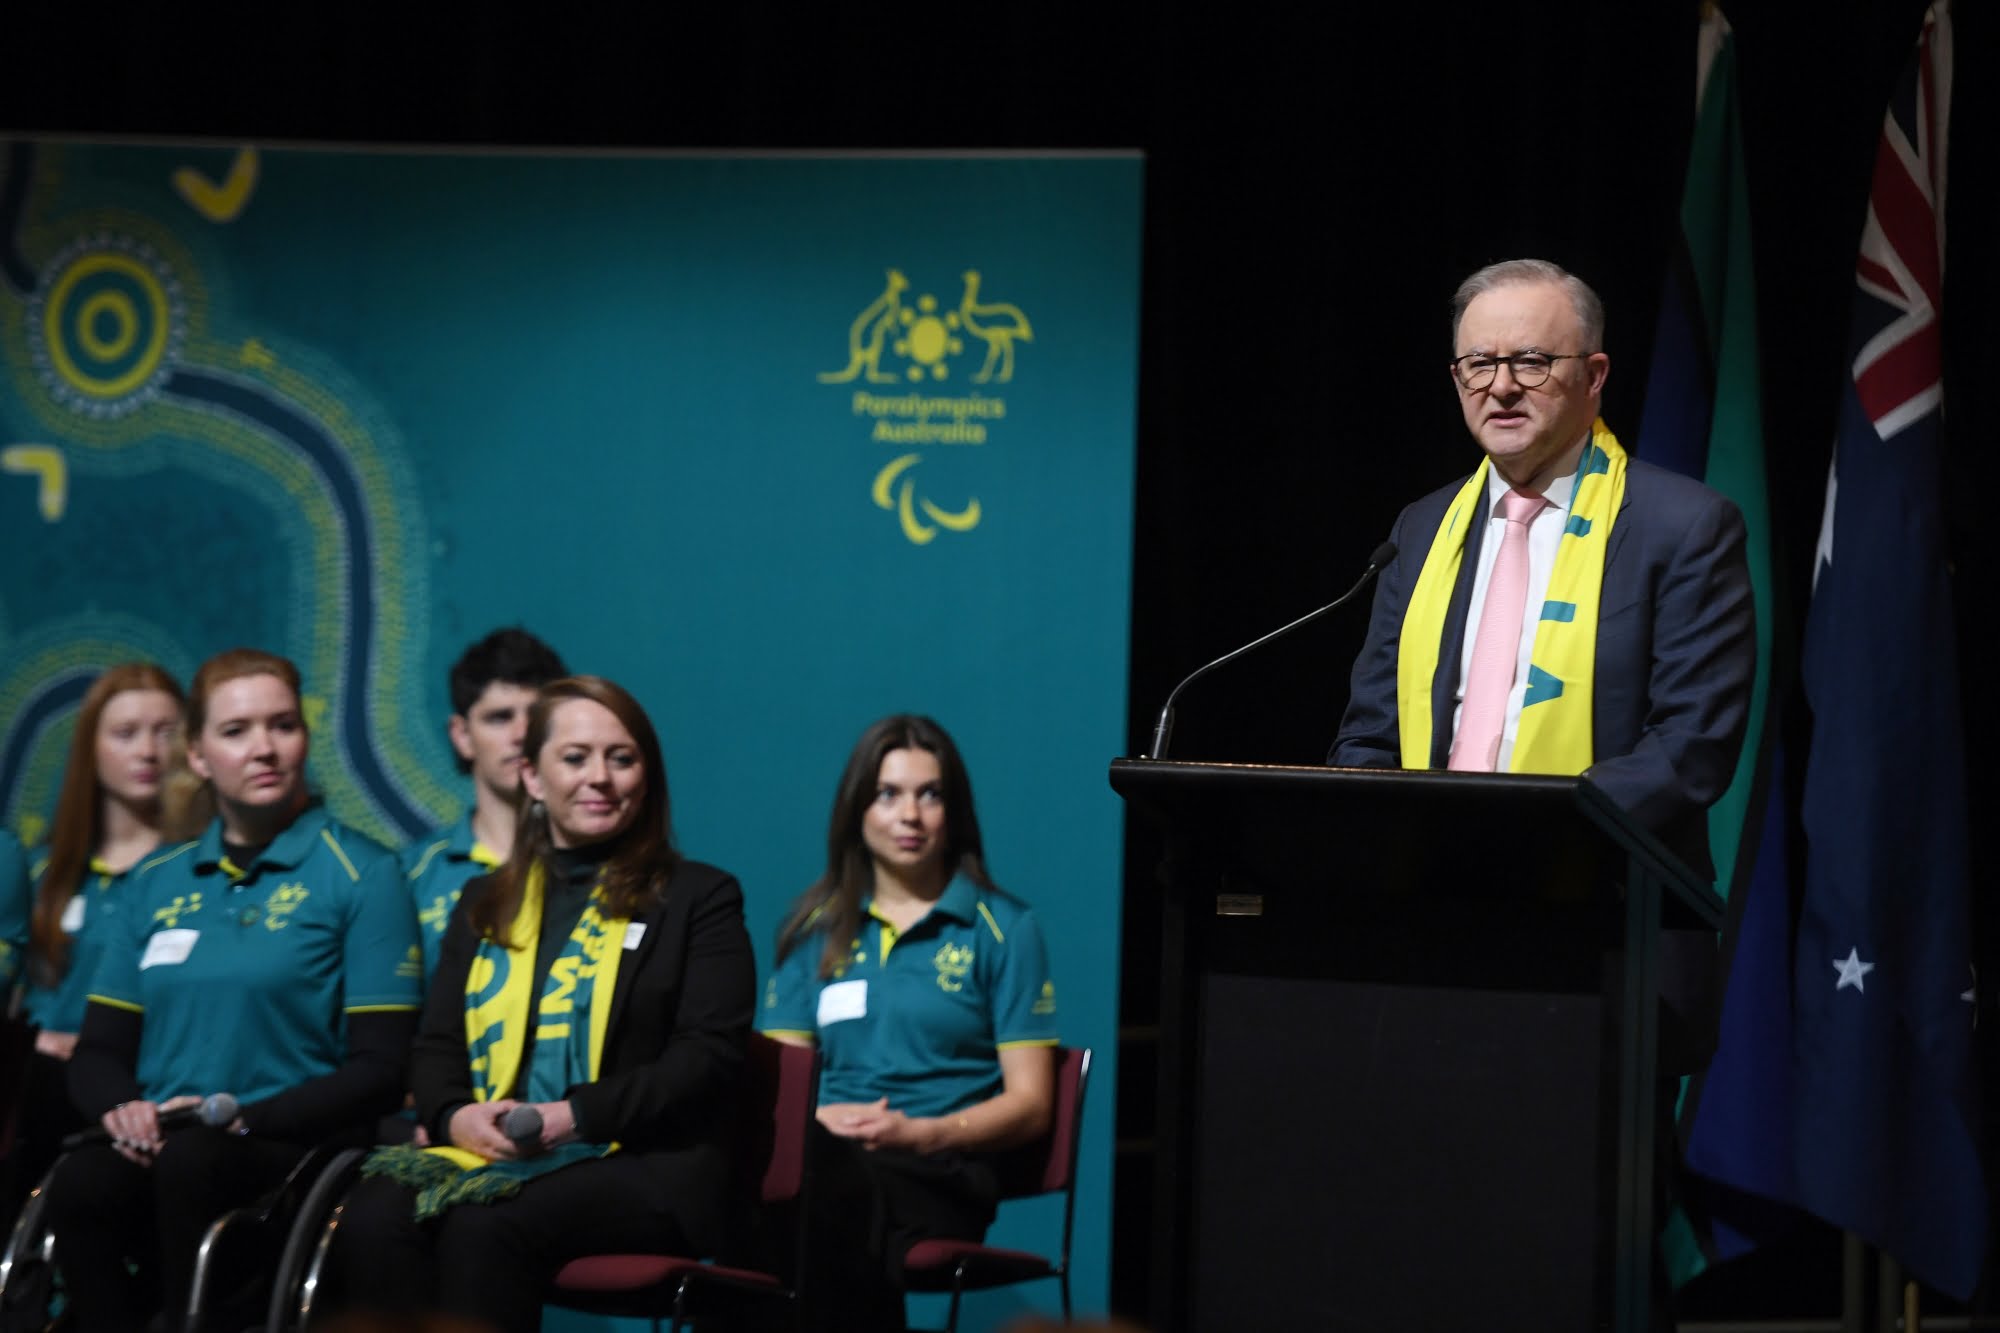 Federal Parliament Officially Launches Australian Paralympic Team